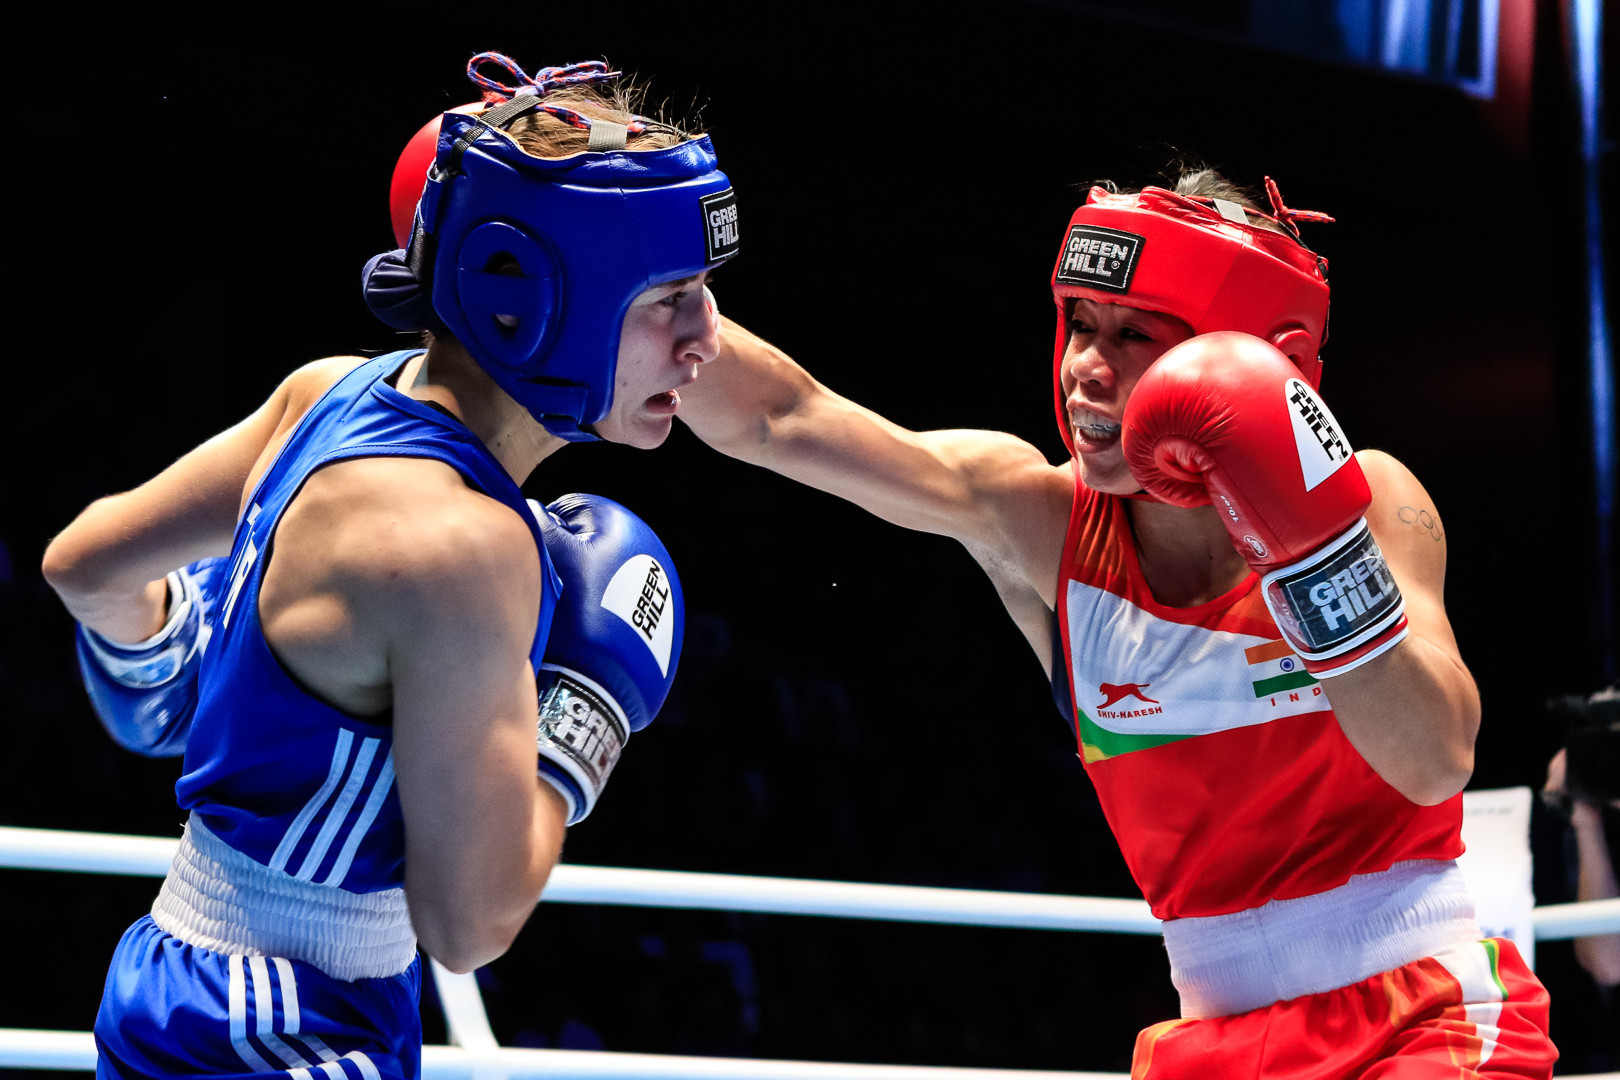 Çakıroğlu won the bout 4-1, with Kom filing a protest which was also rejected ©AIBA